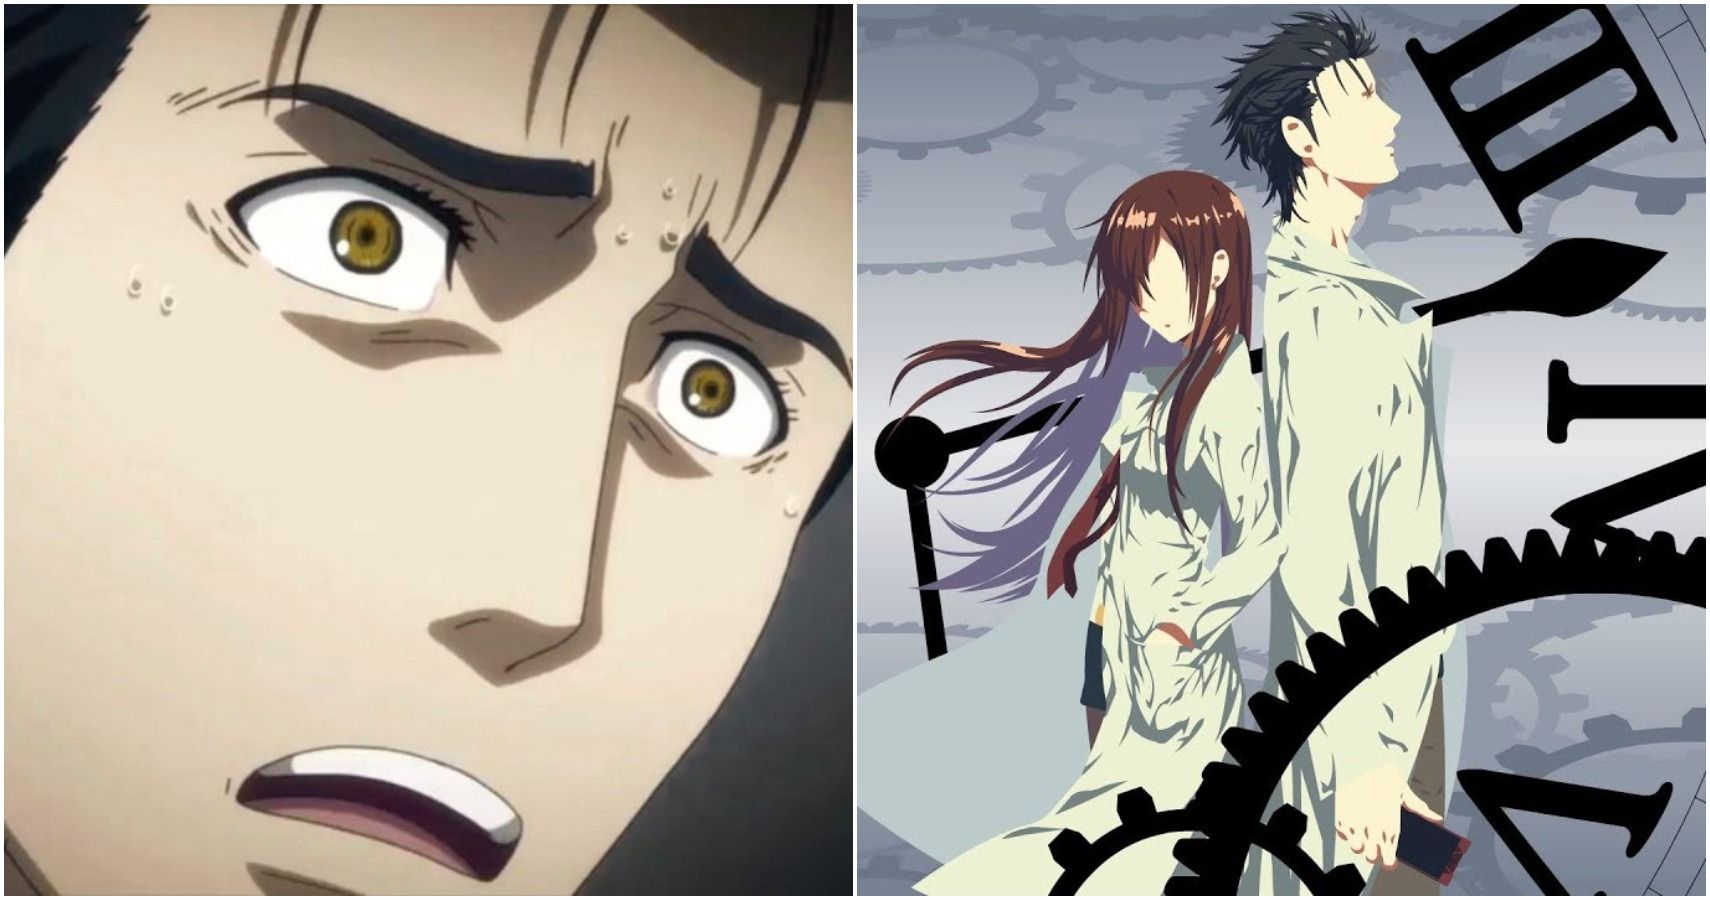 Steins Gate fans! Check out the spots in Akihabara that inspired